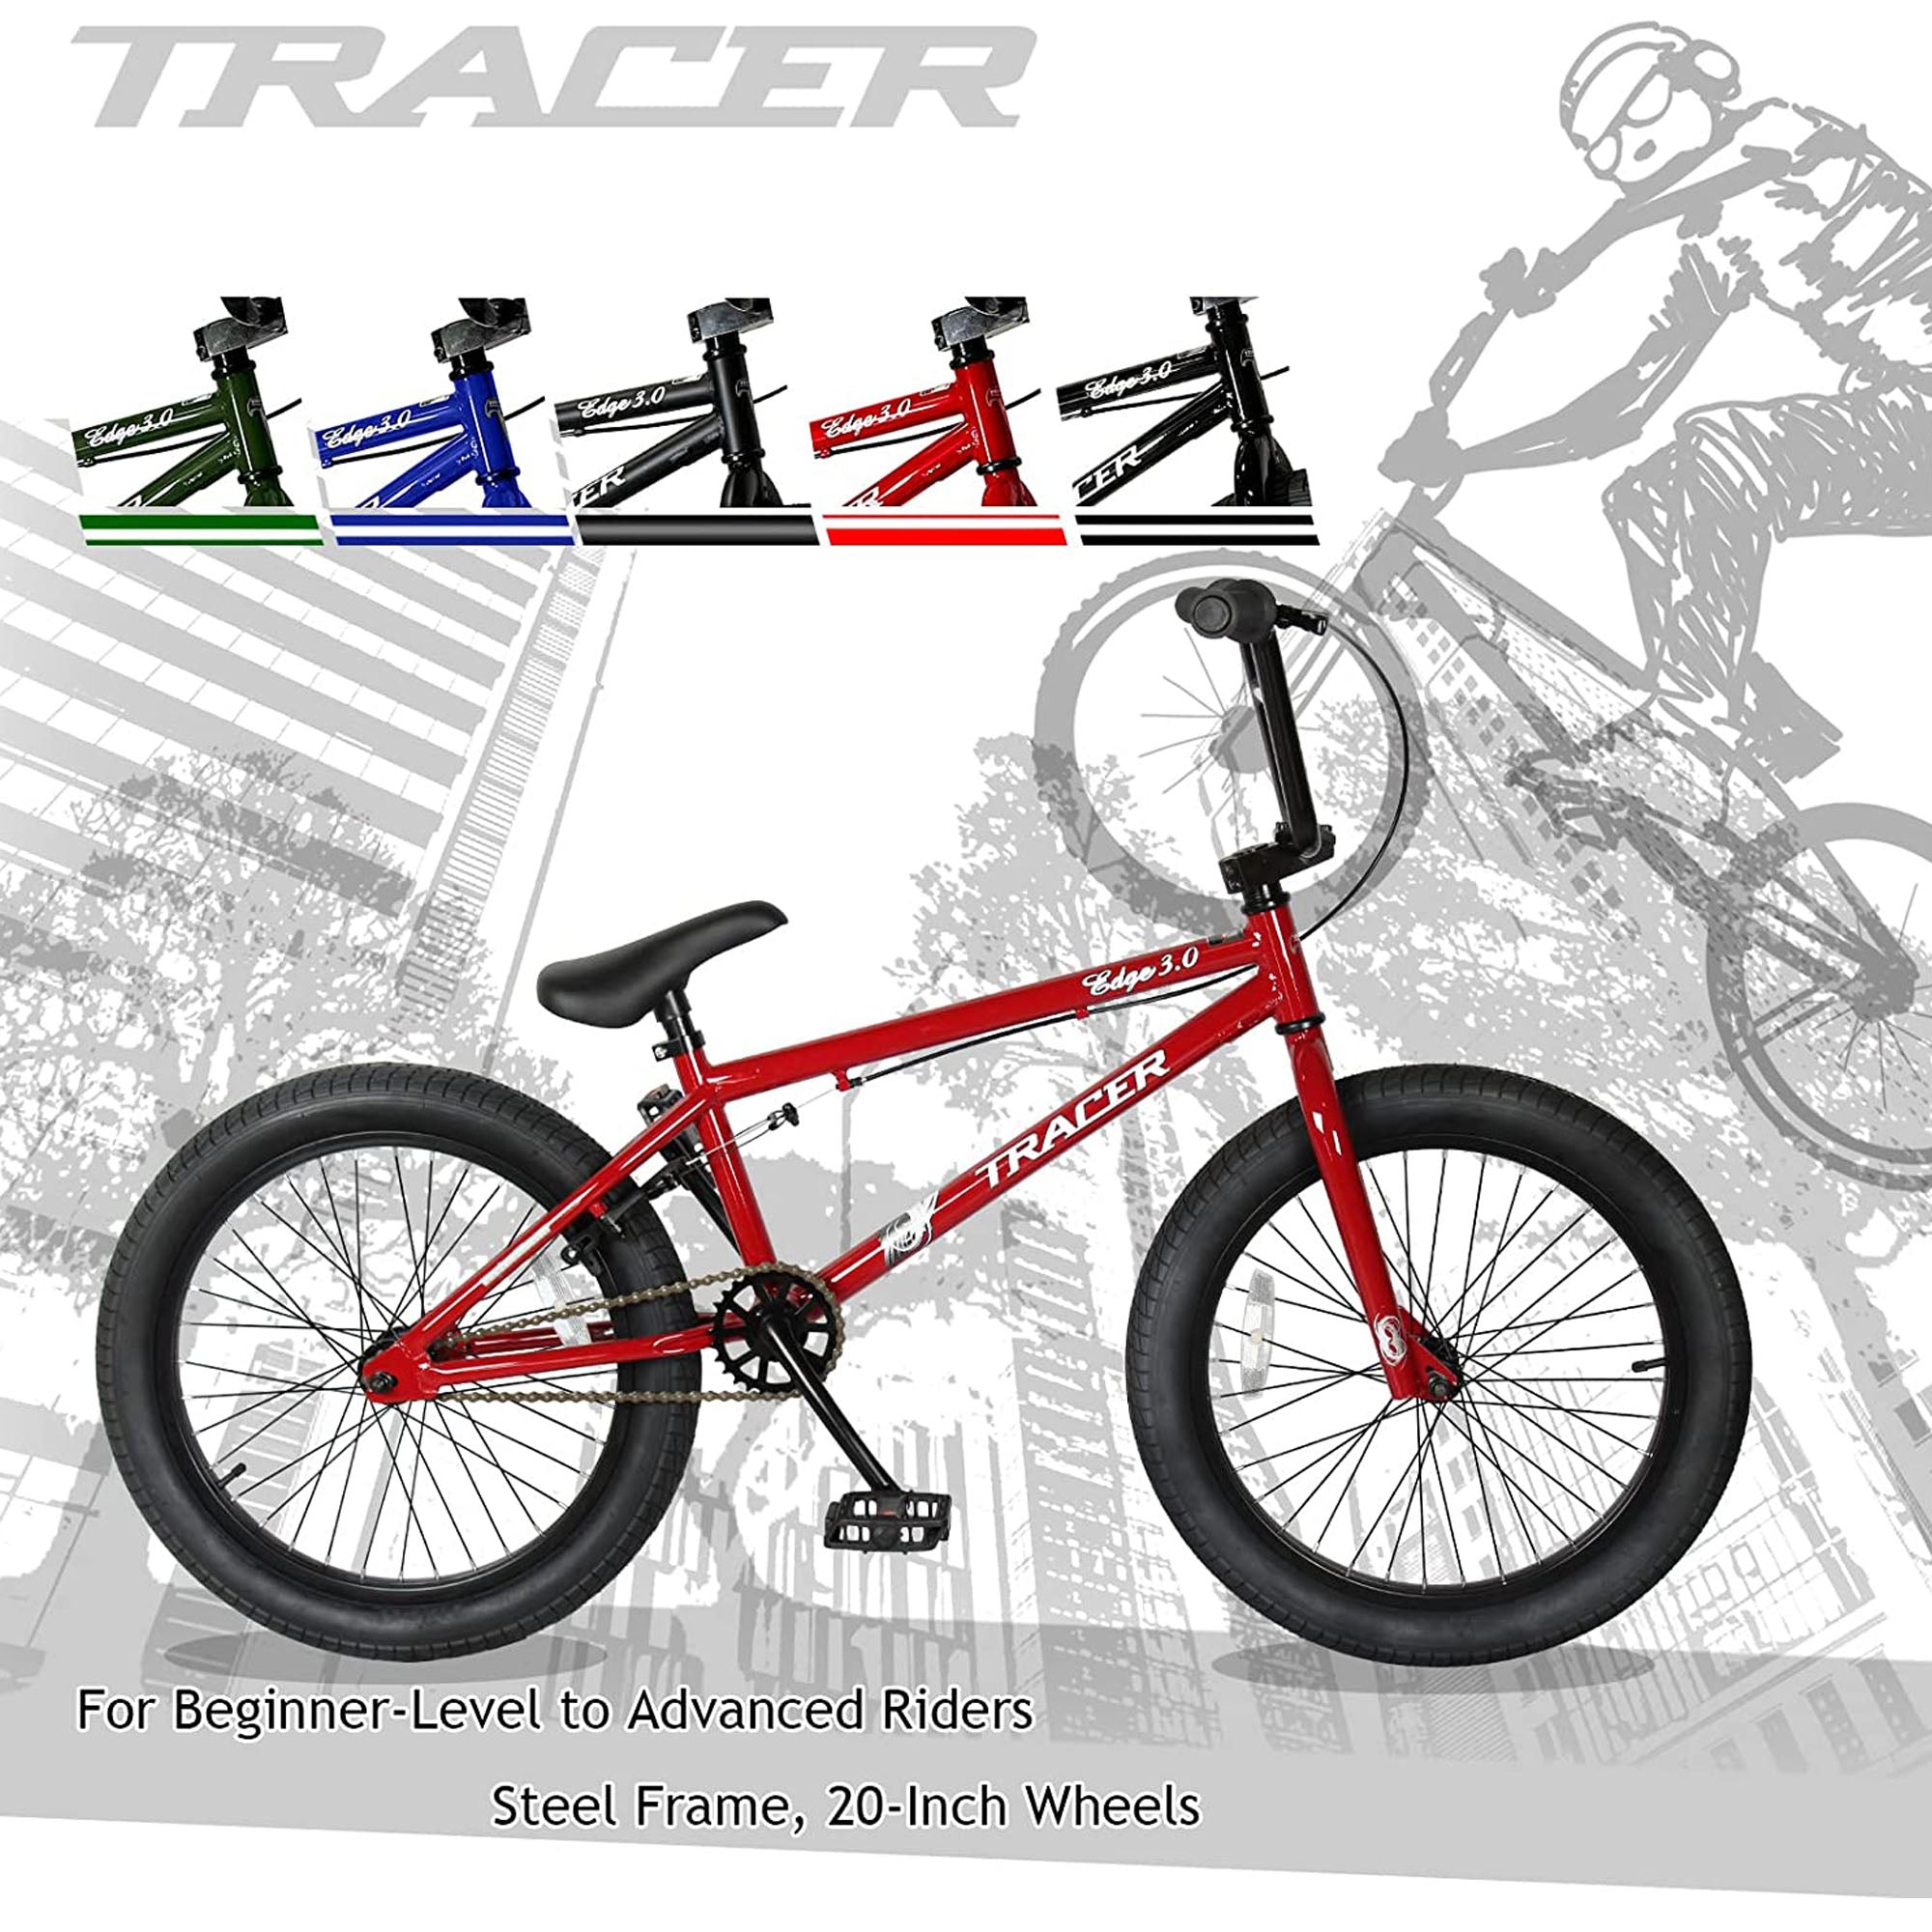 Freestyle Bicycle TRACER Kids BMX 0.3 Red - DerakBikes